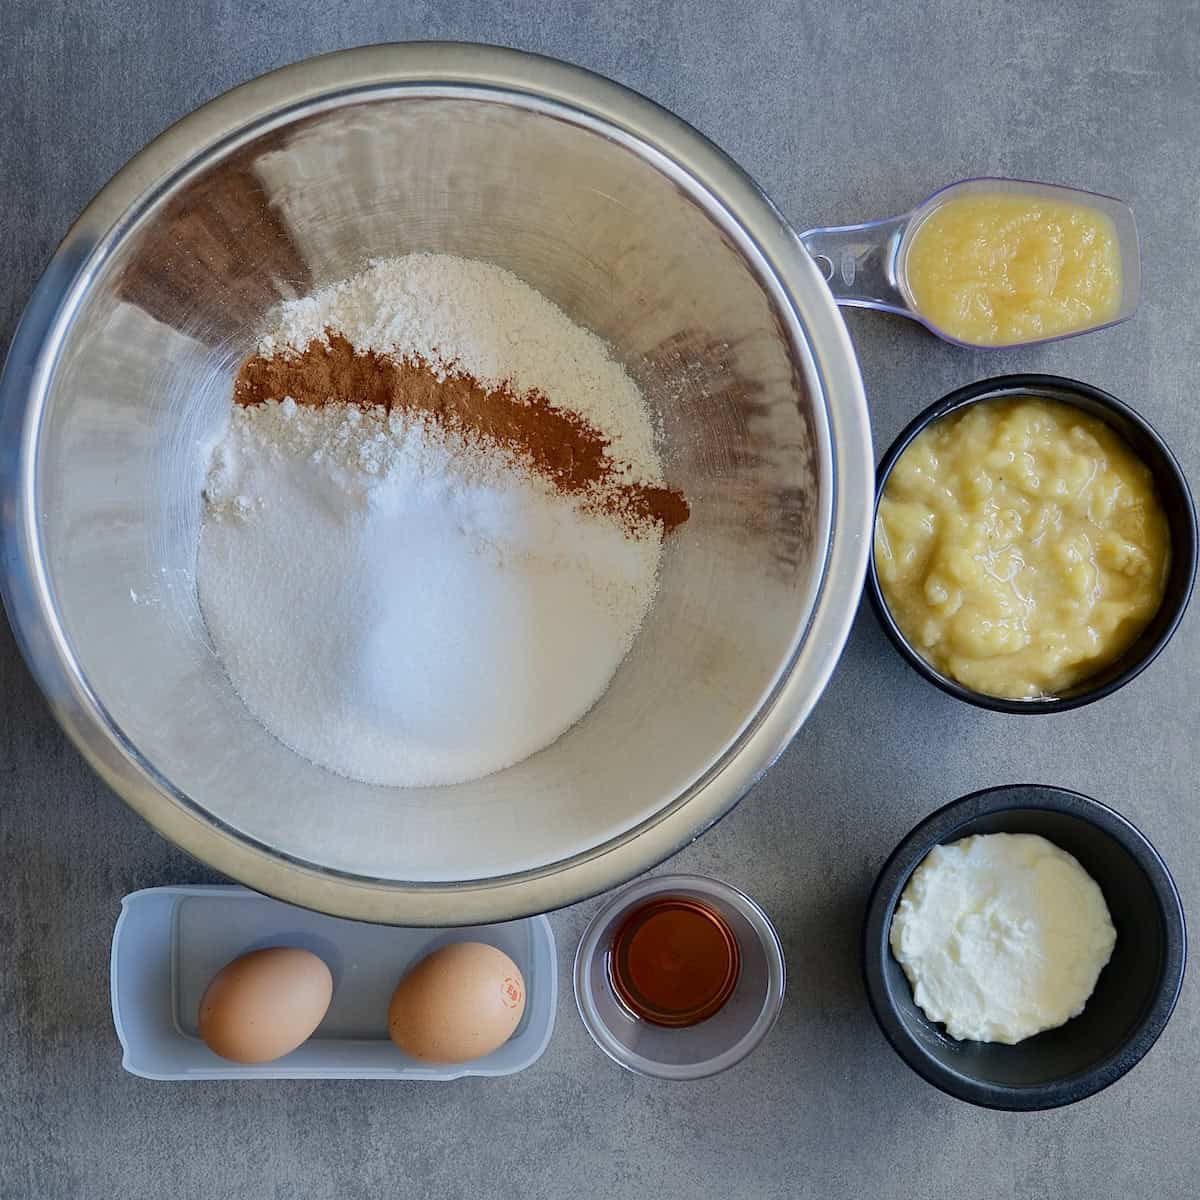 Ingredients for making banana bread from scratch